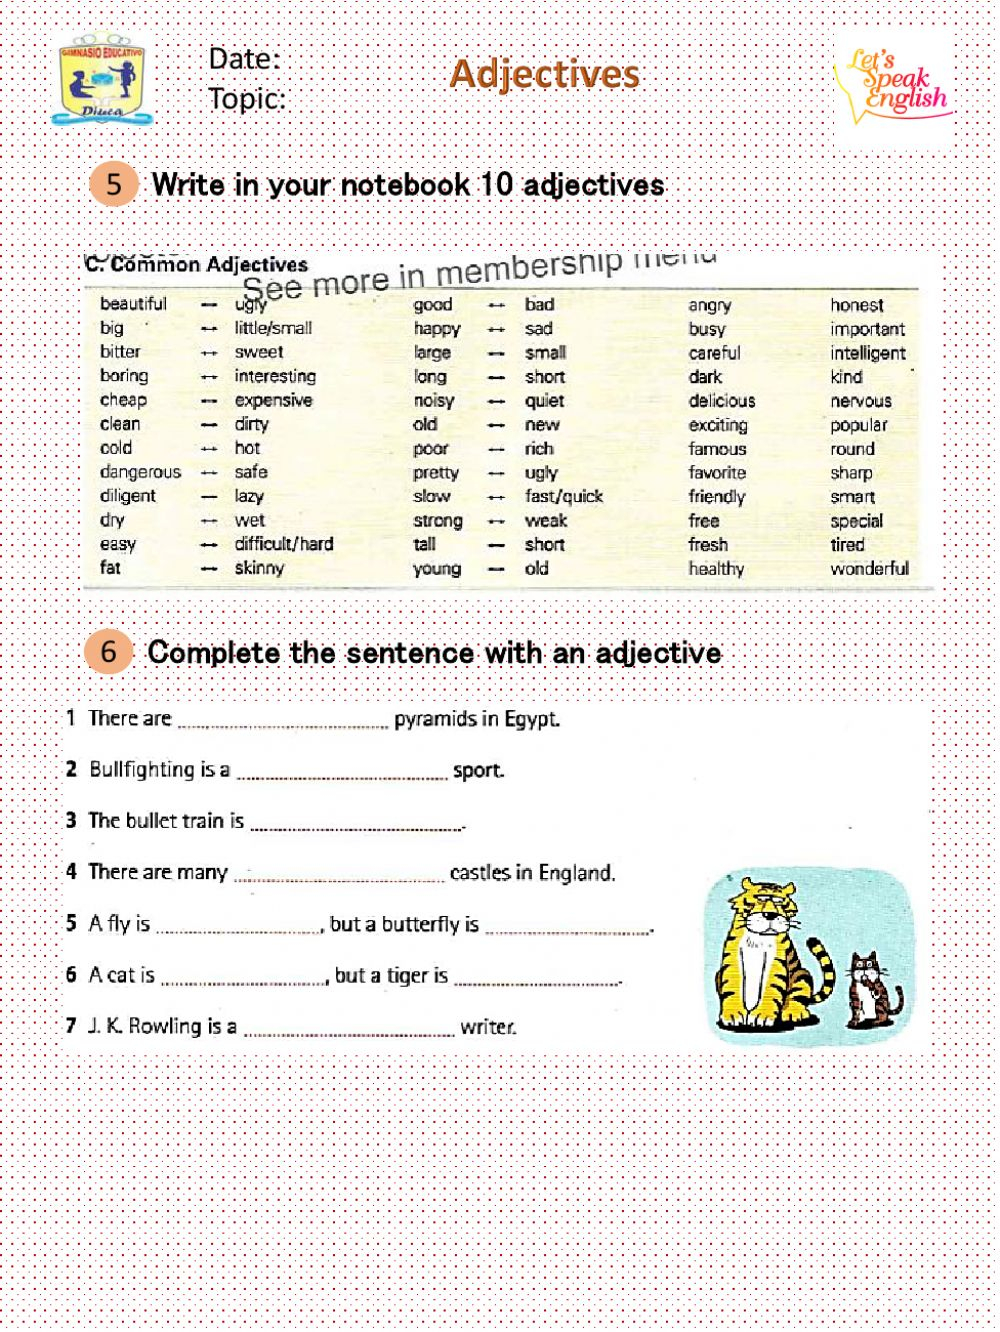 pariciples-as-adjectives-worksheets-adjectiveworksheets